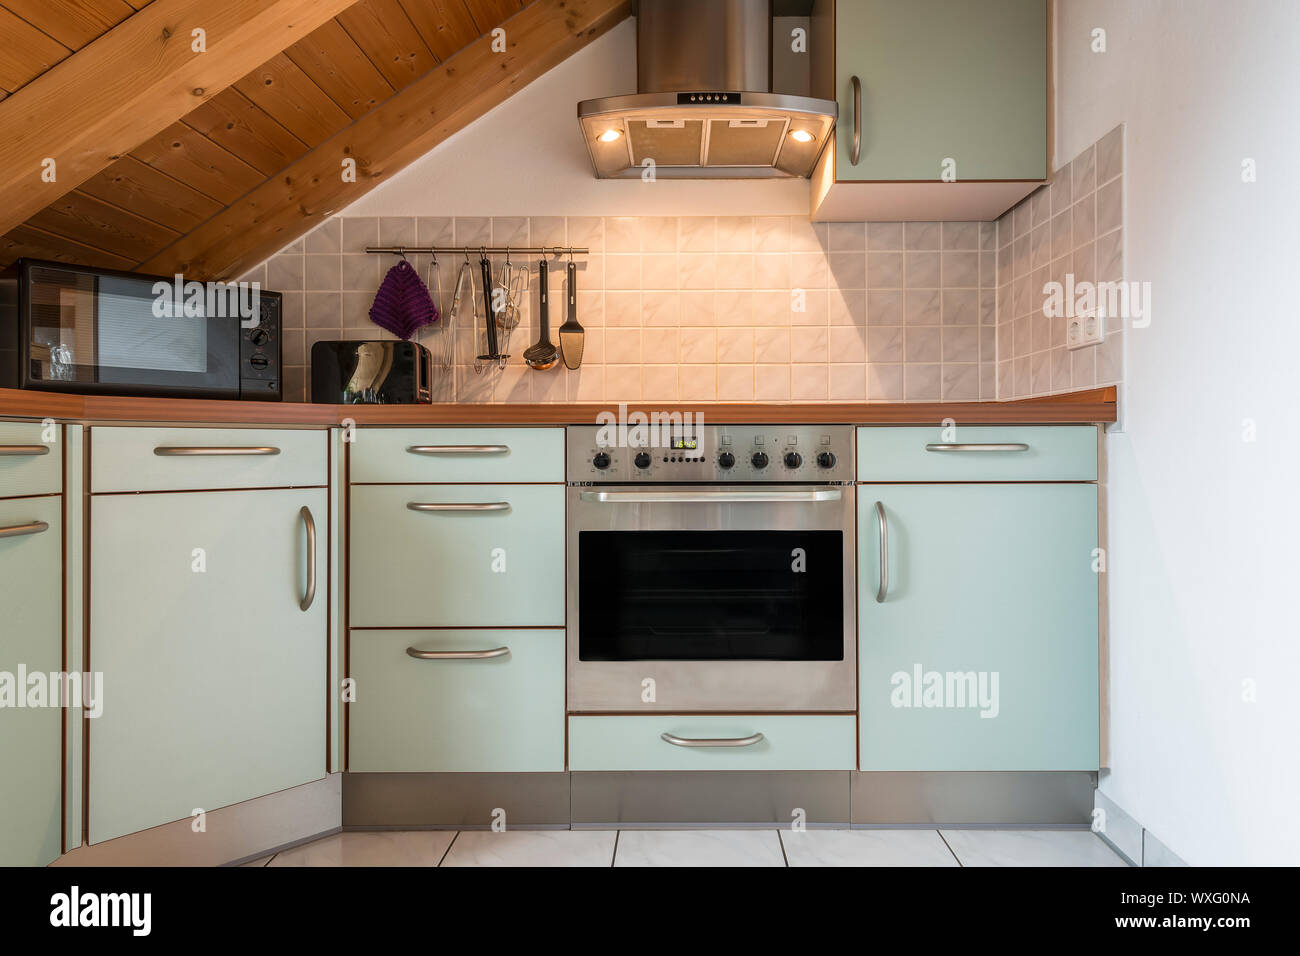 kitchen of a flat with oven, microwave, stove, hood, cabinets and wooden ceiling Stock Photo